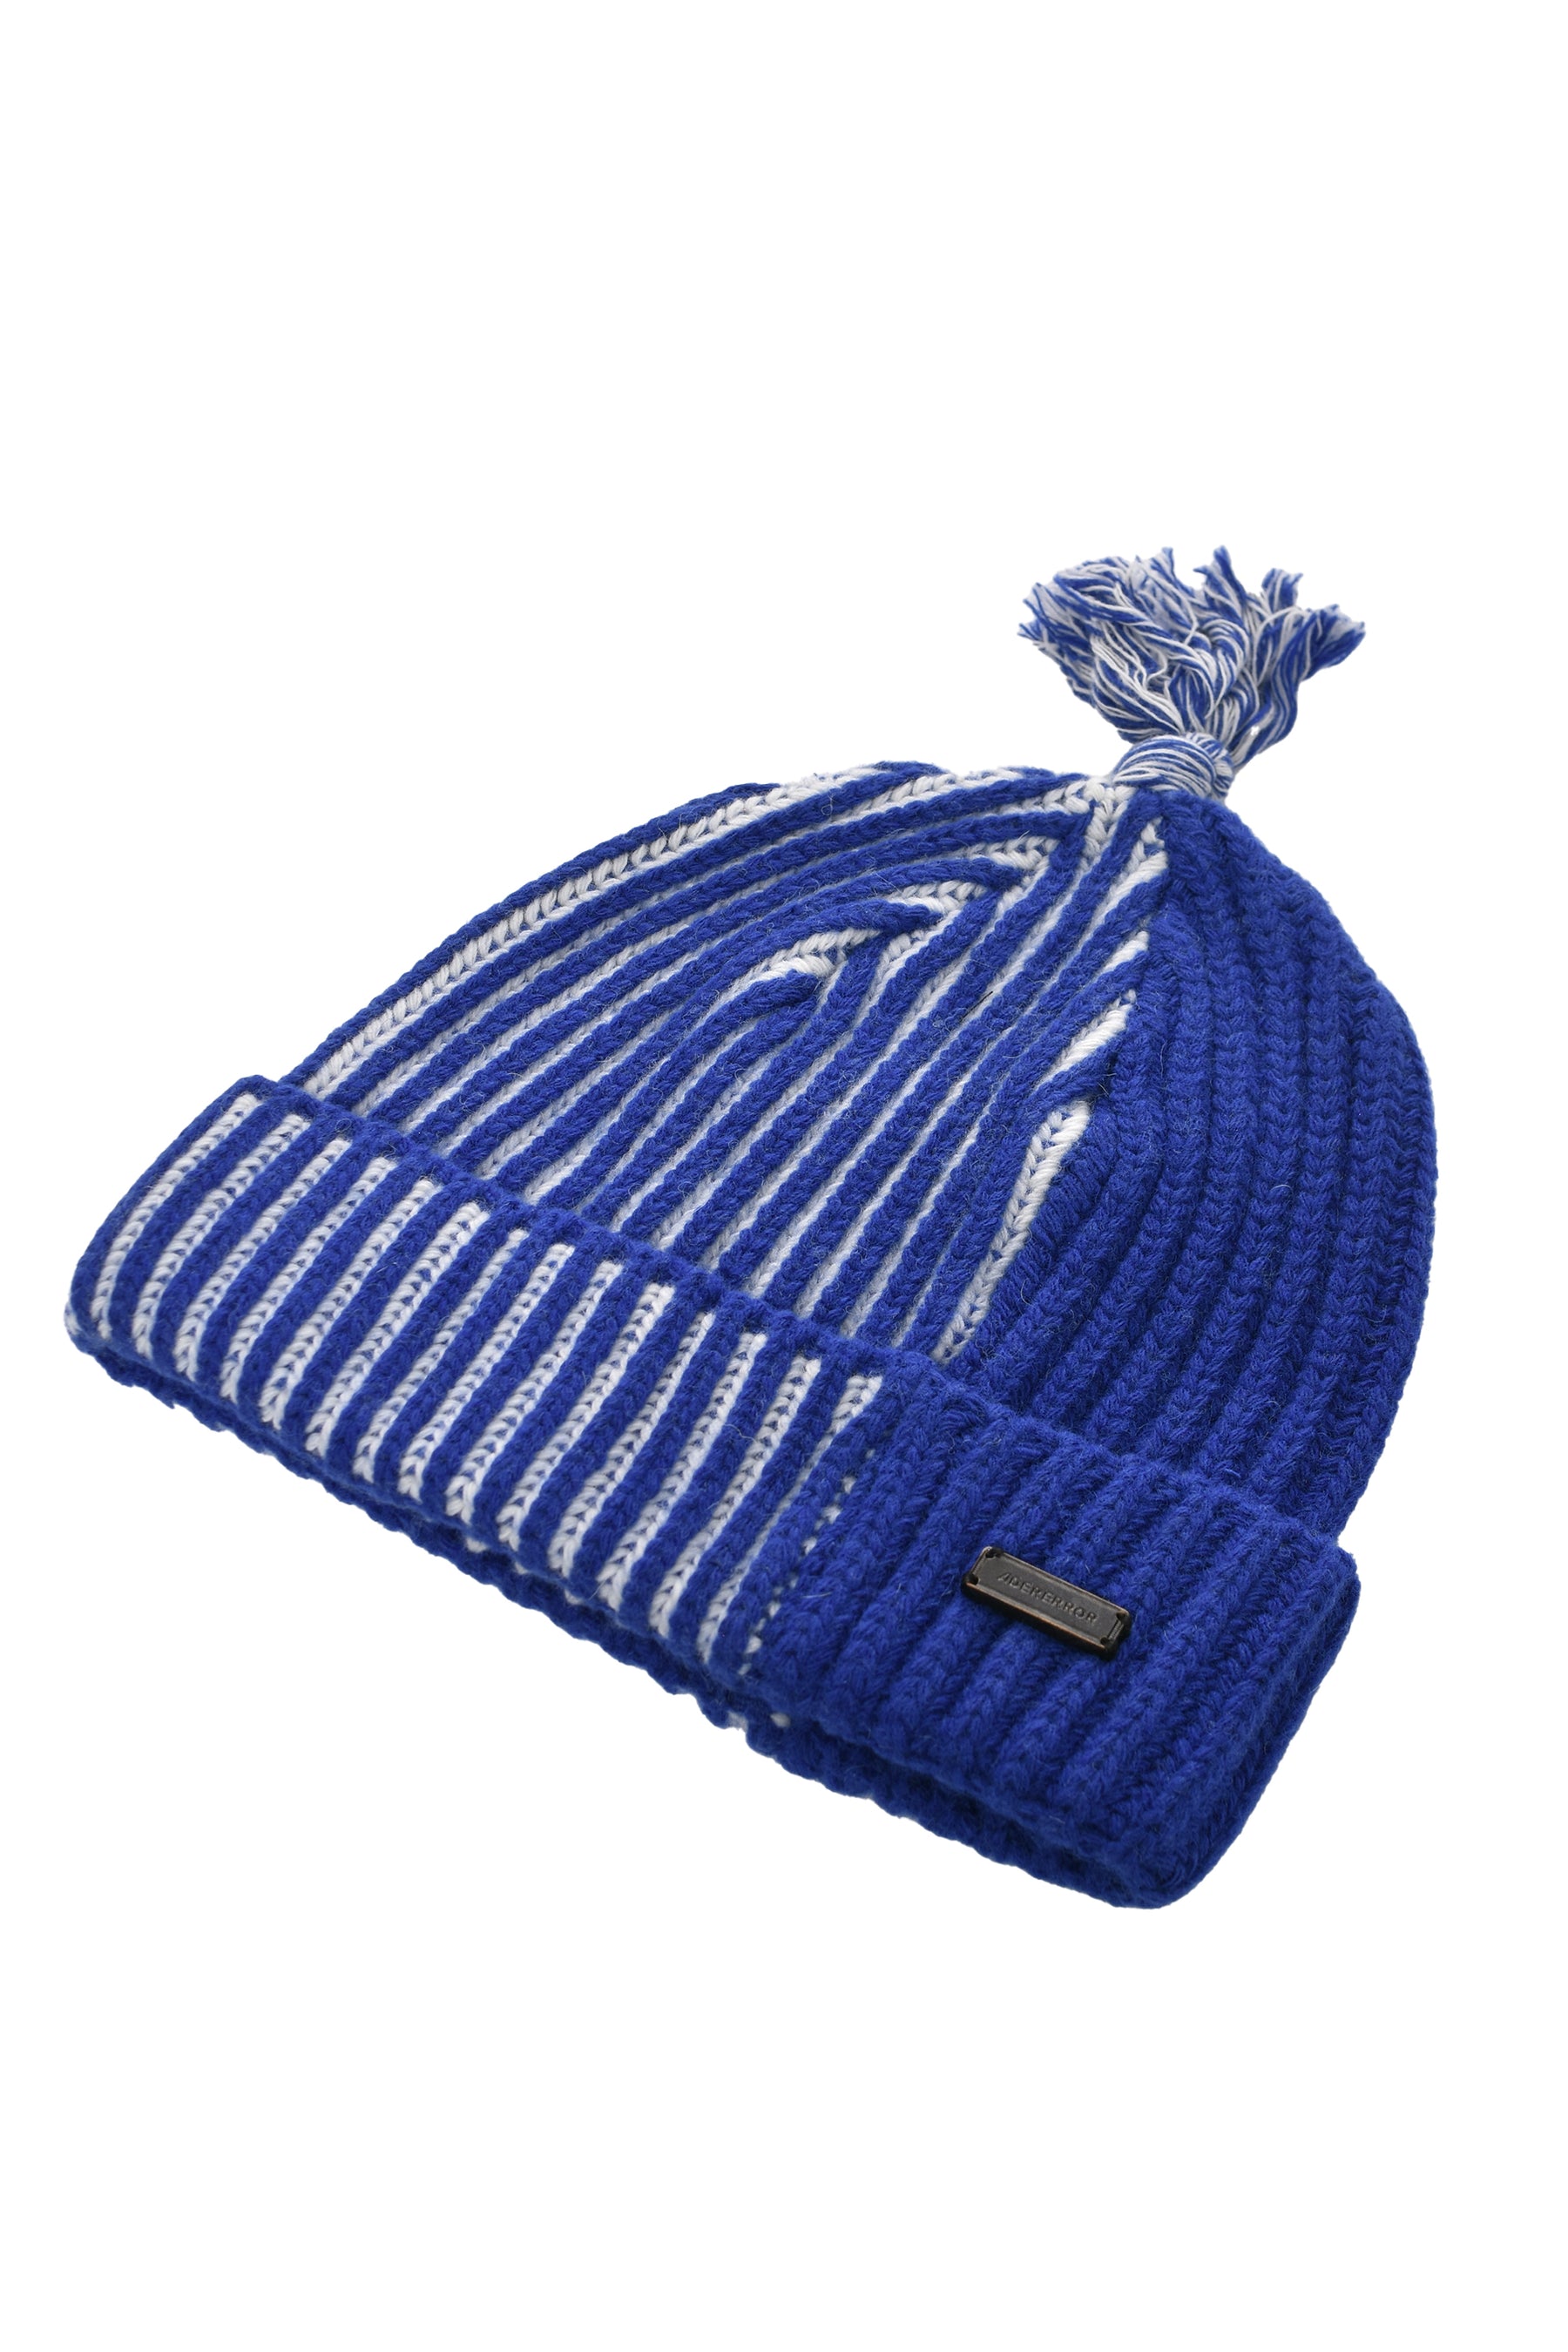 ADERERROR BEANIE WITH COMBINATION COLORS / BLU